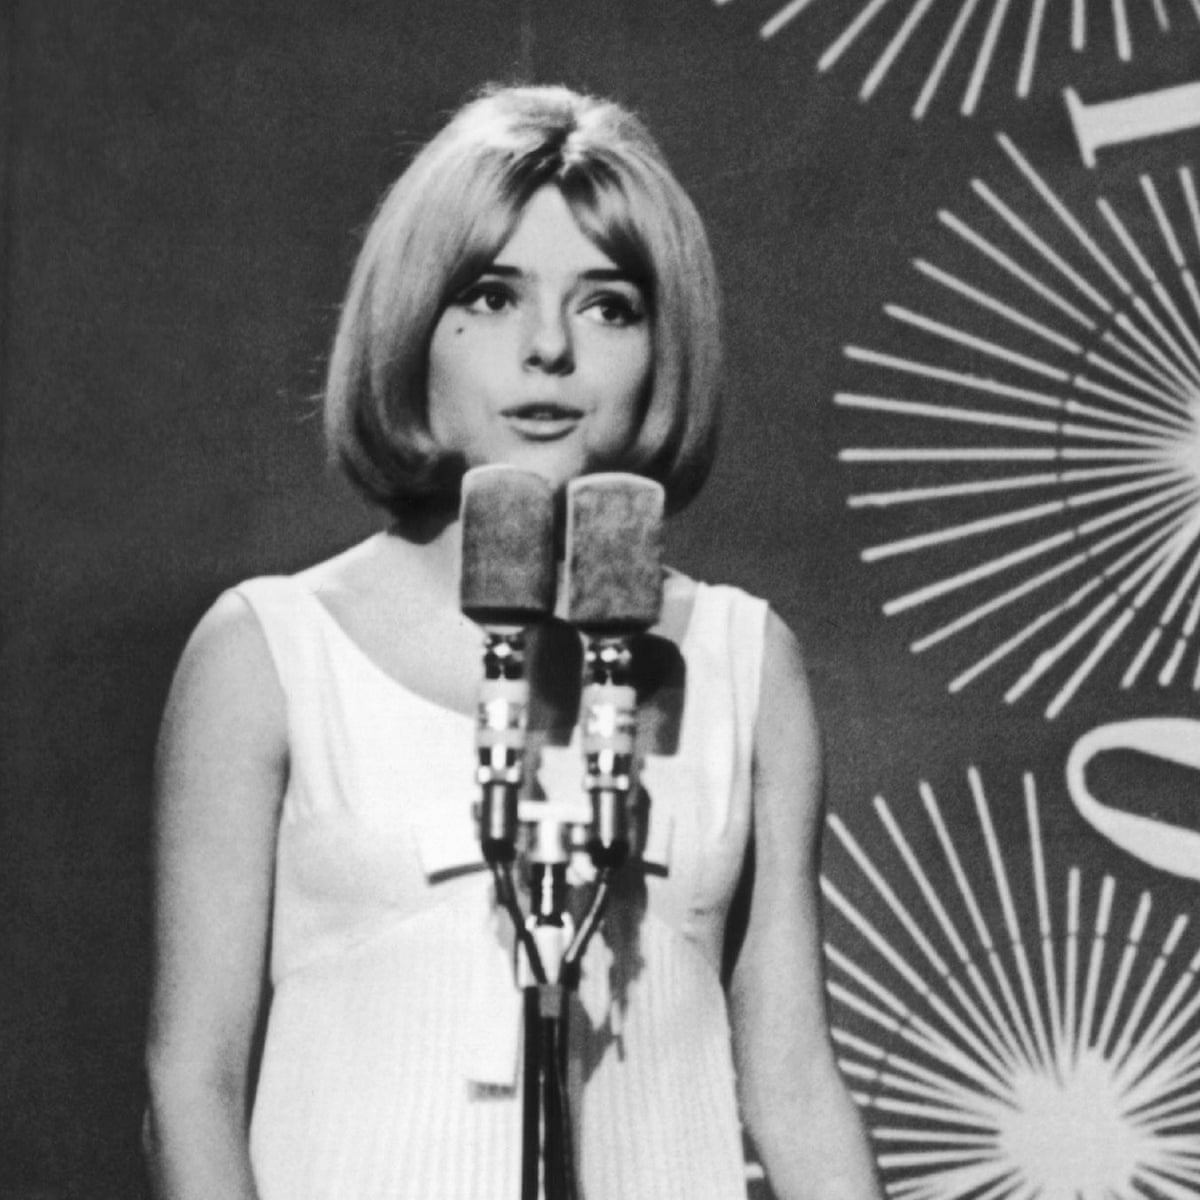 France Gall obituary | Pop and rock | The Guardian